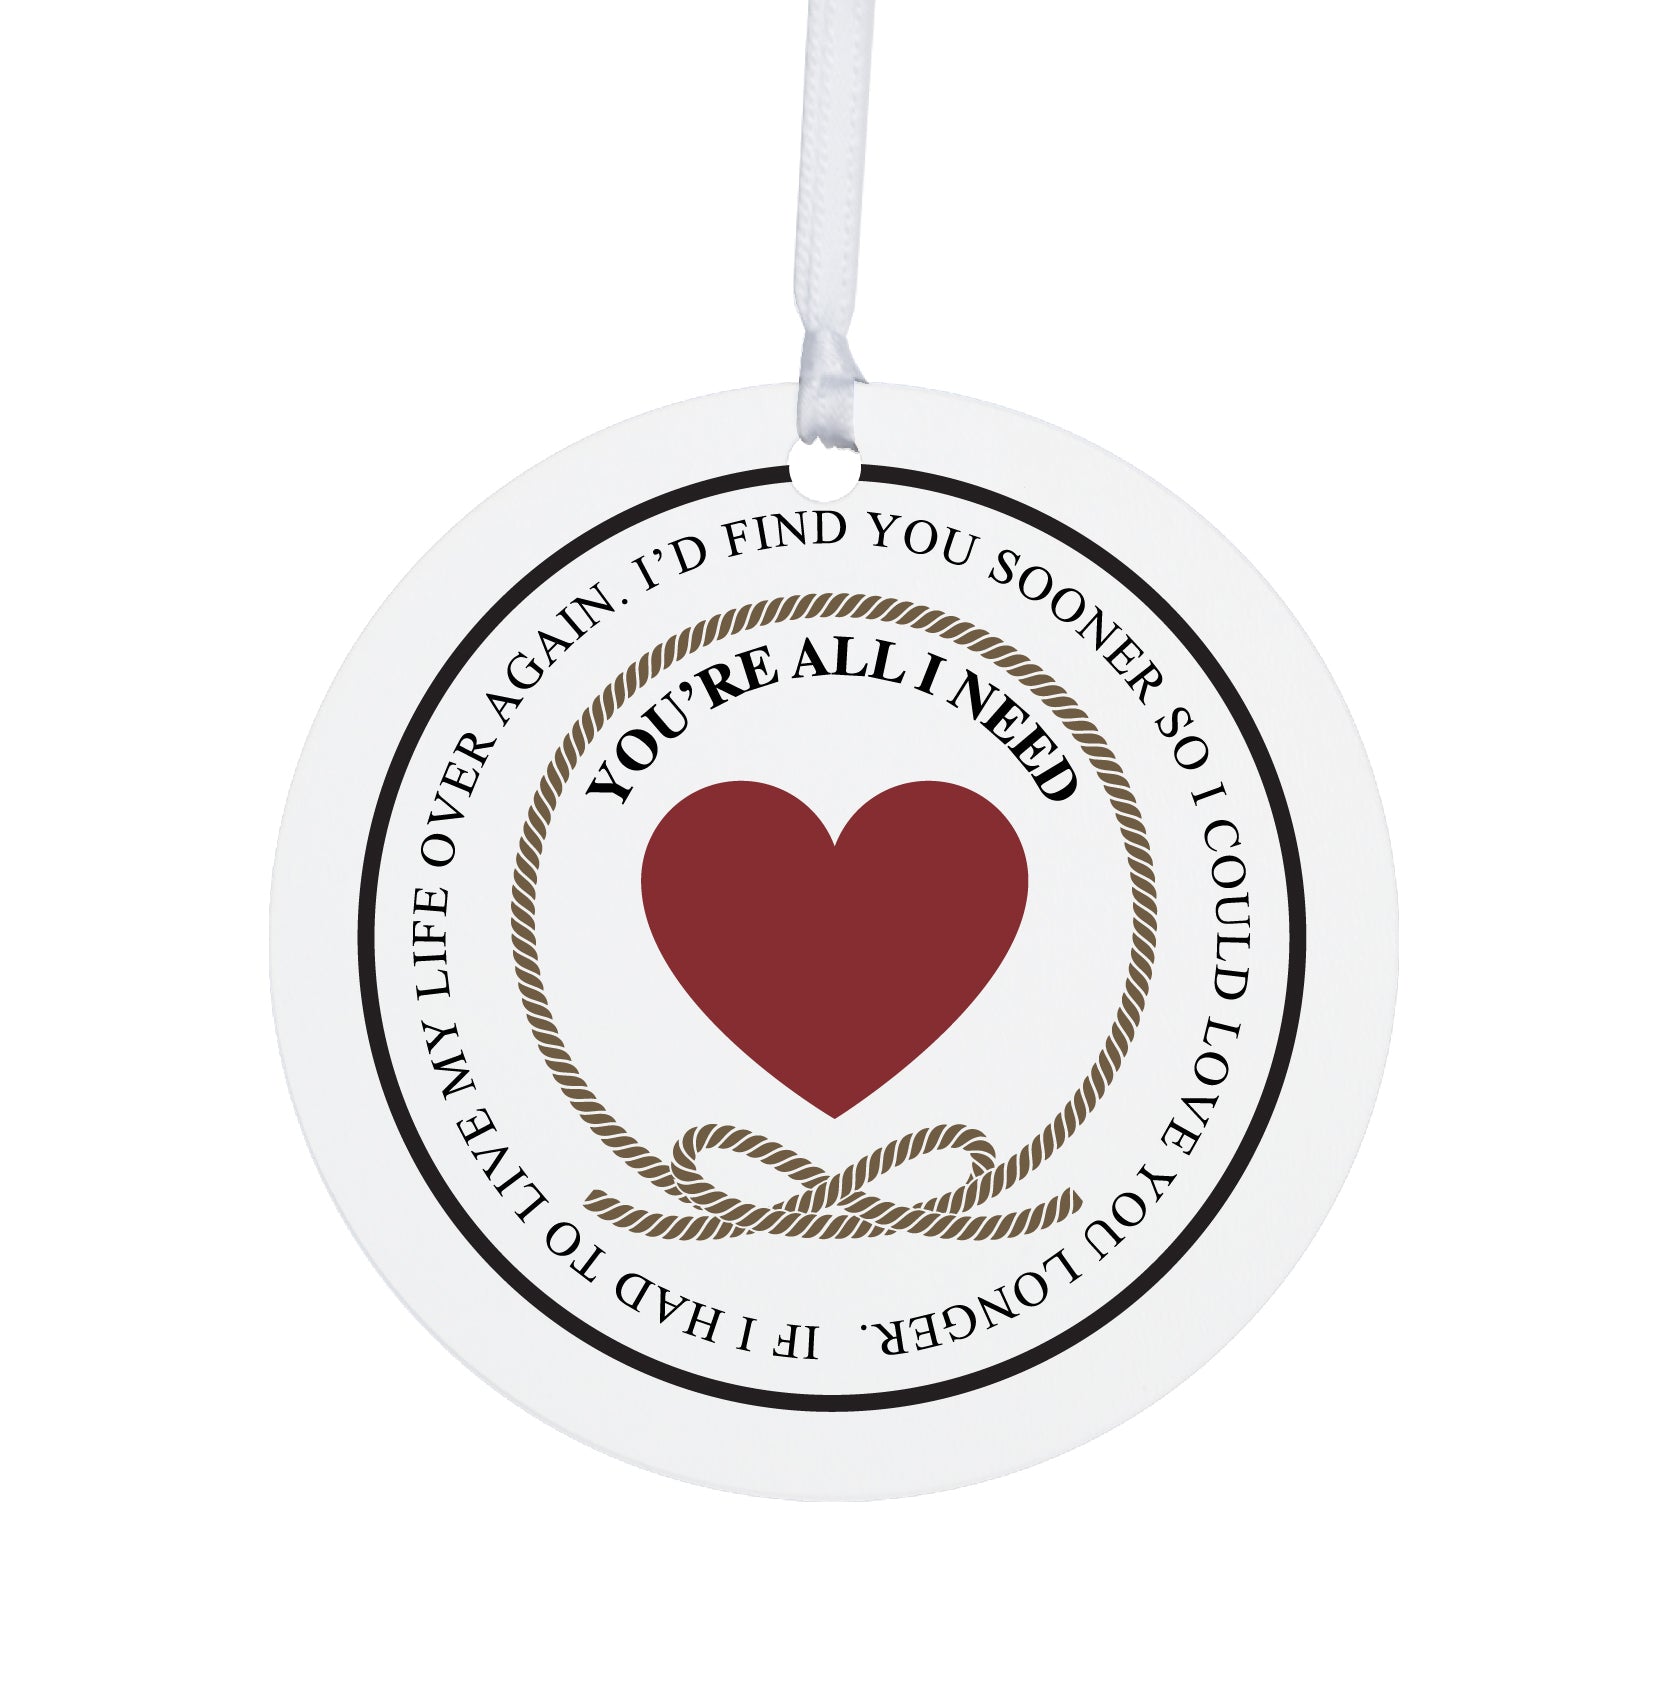 Inspirational Wedding Anniversary Christmas Ornament Gifts for Couple - You Are All I Need - LifeSong Milestones